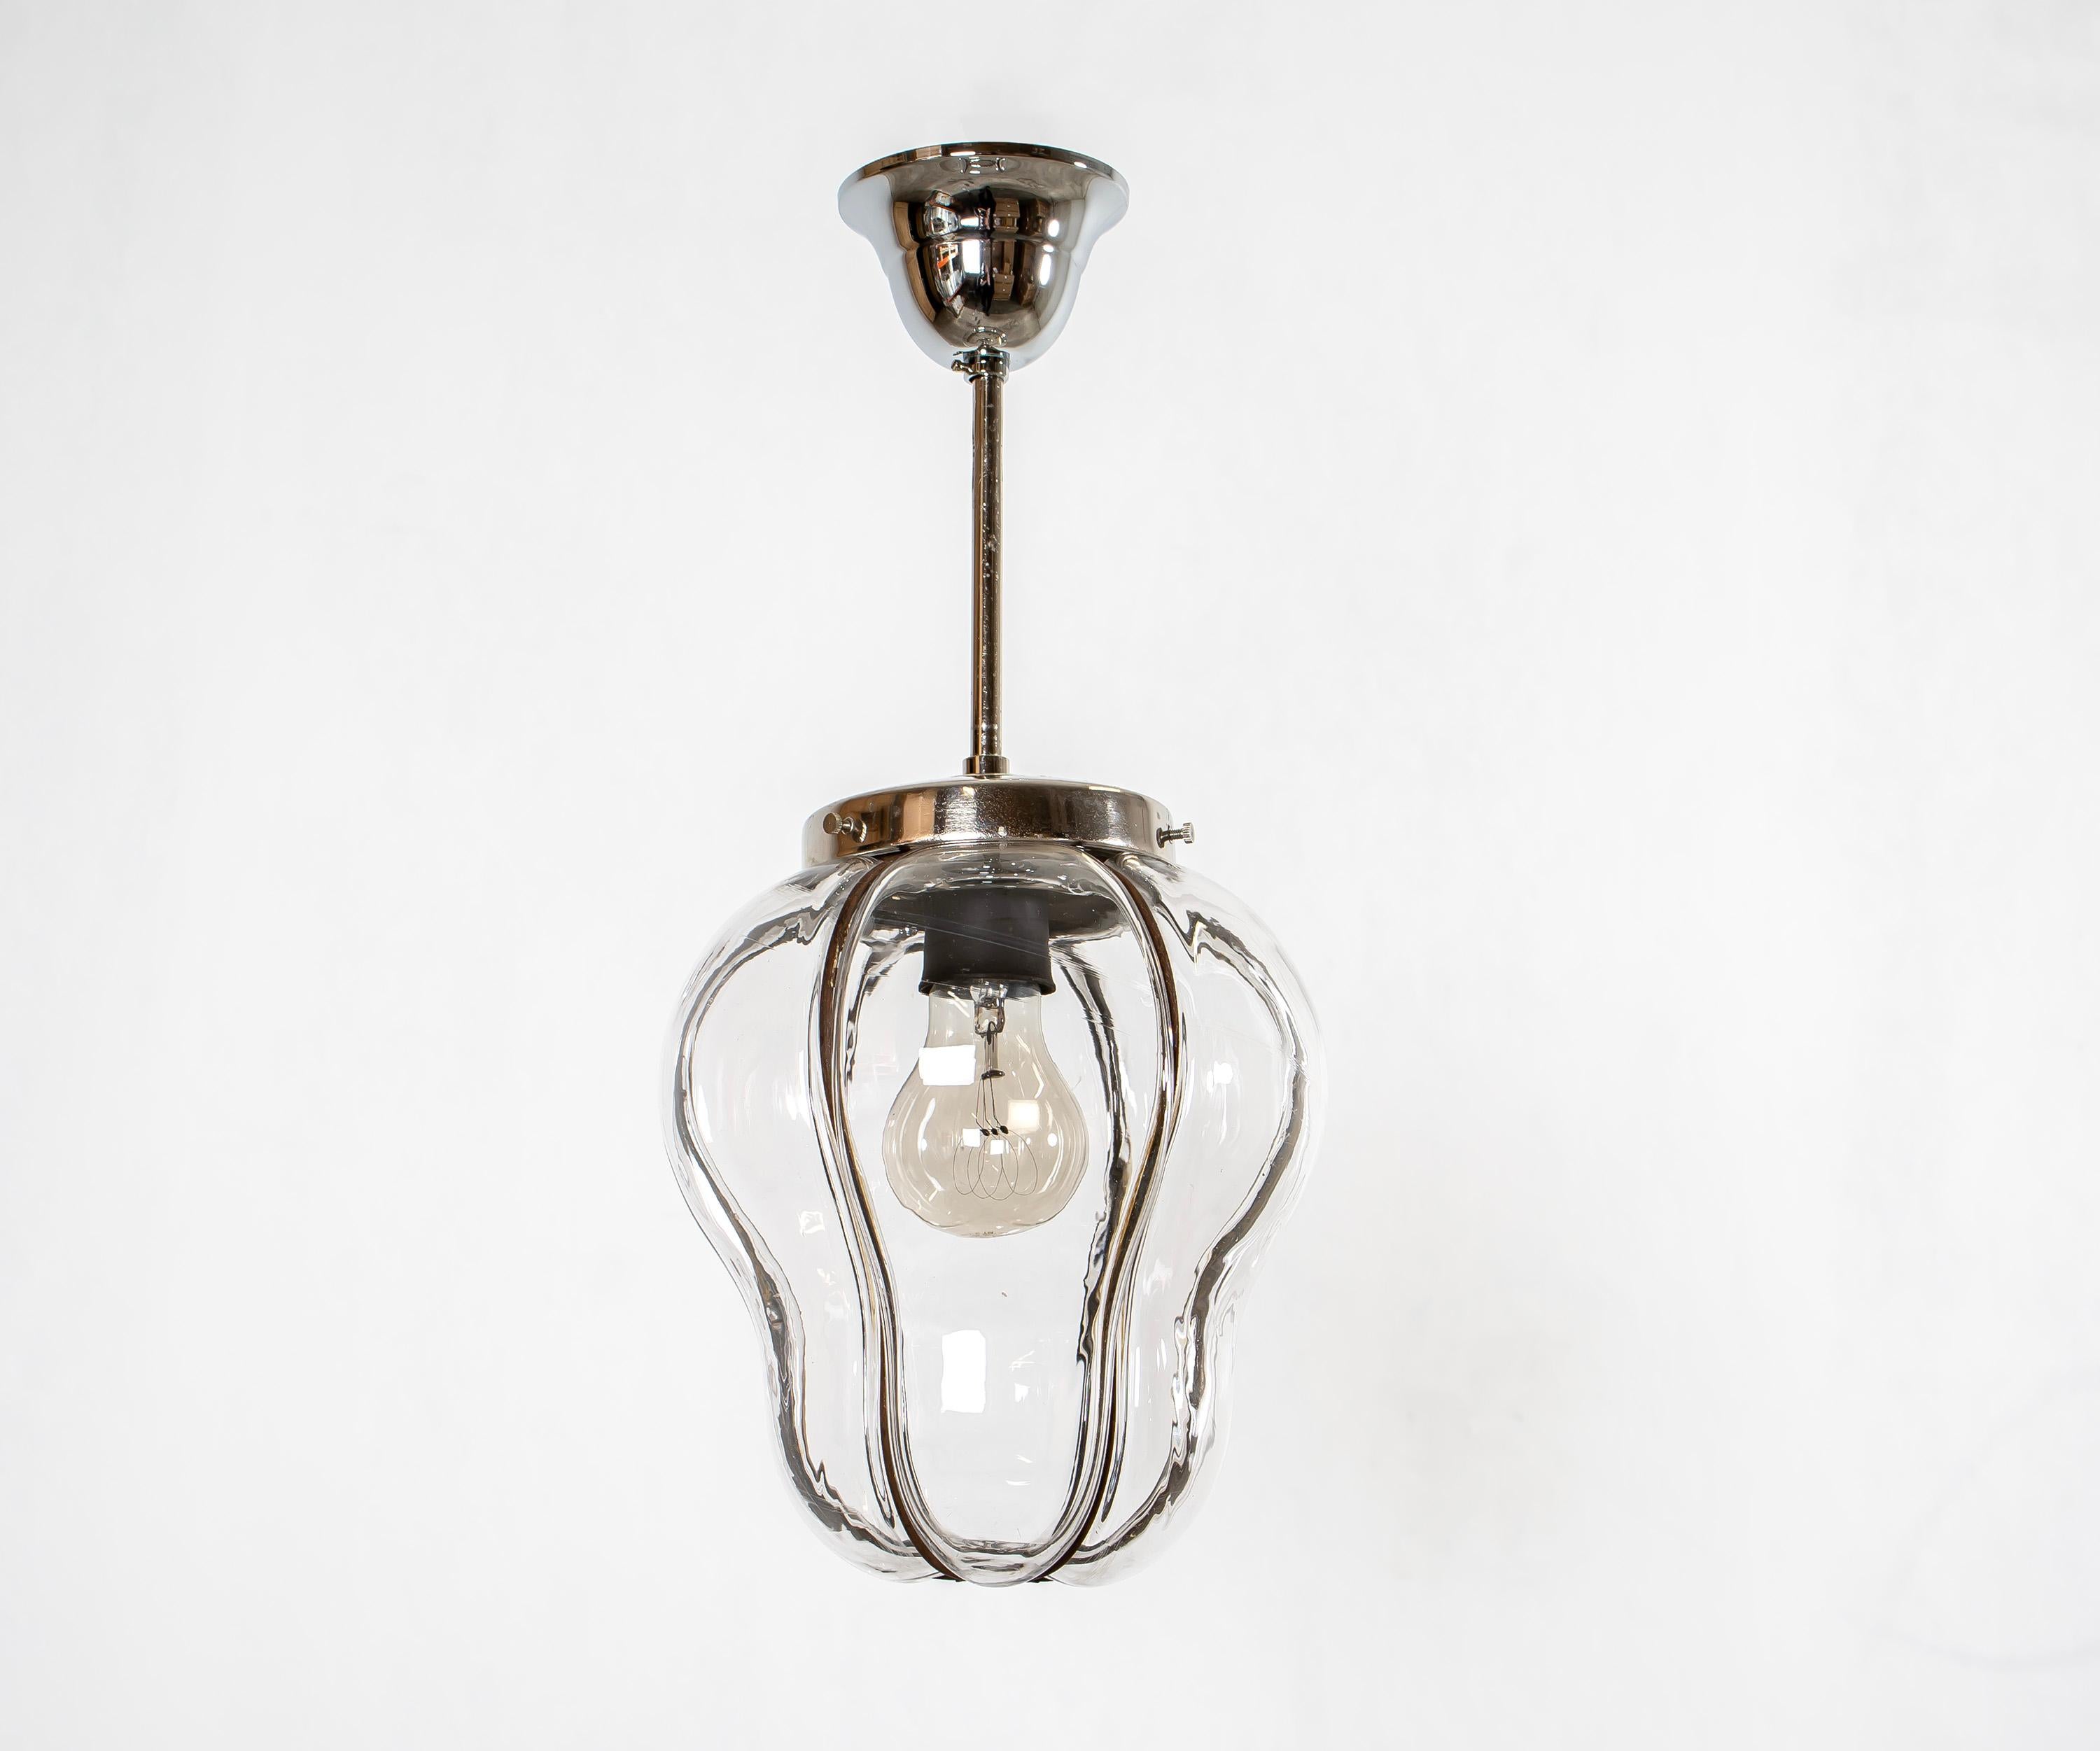 Decorative ceiling light with a clear glass shade on a steel wire frame and chrome stem. Designed and made in Norway from circa 1950s first half. The lamp is fully working and in very good vintage condition. It is fitted with one E27 bulb holder